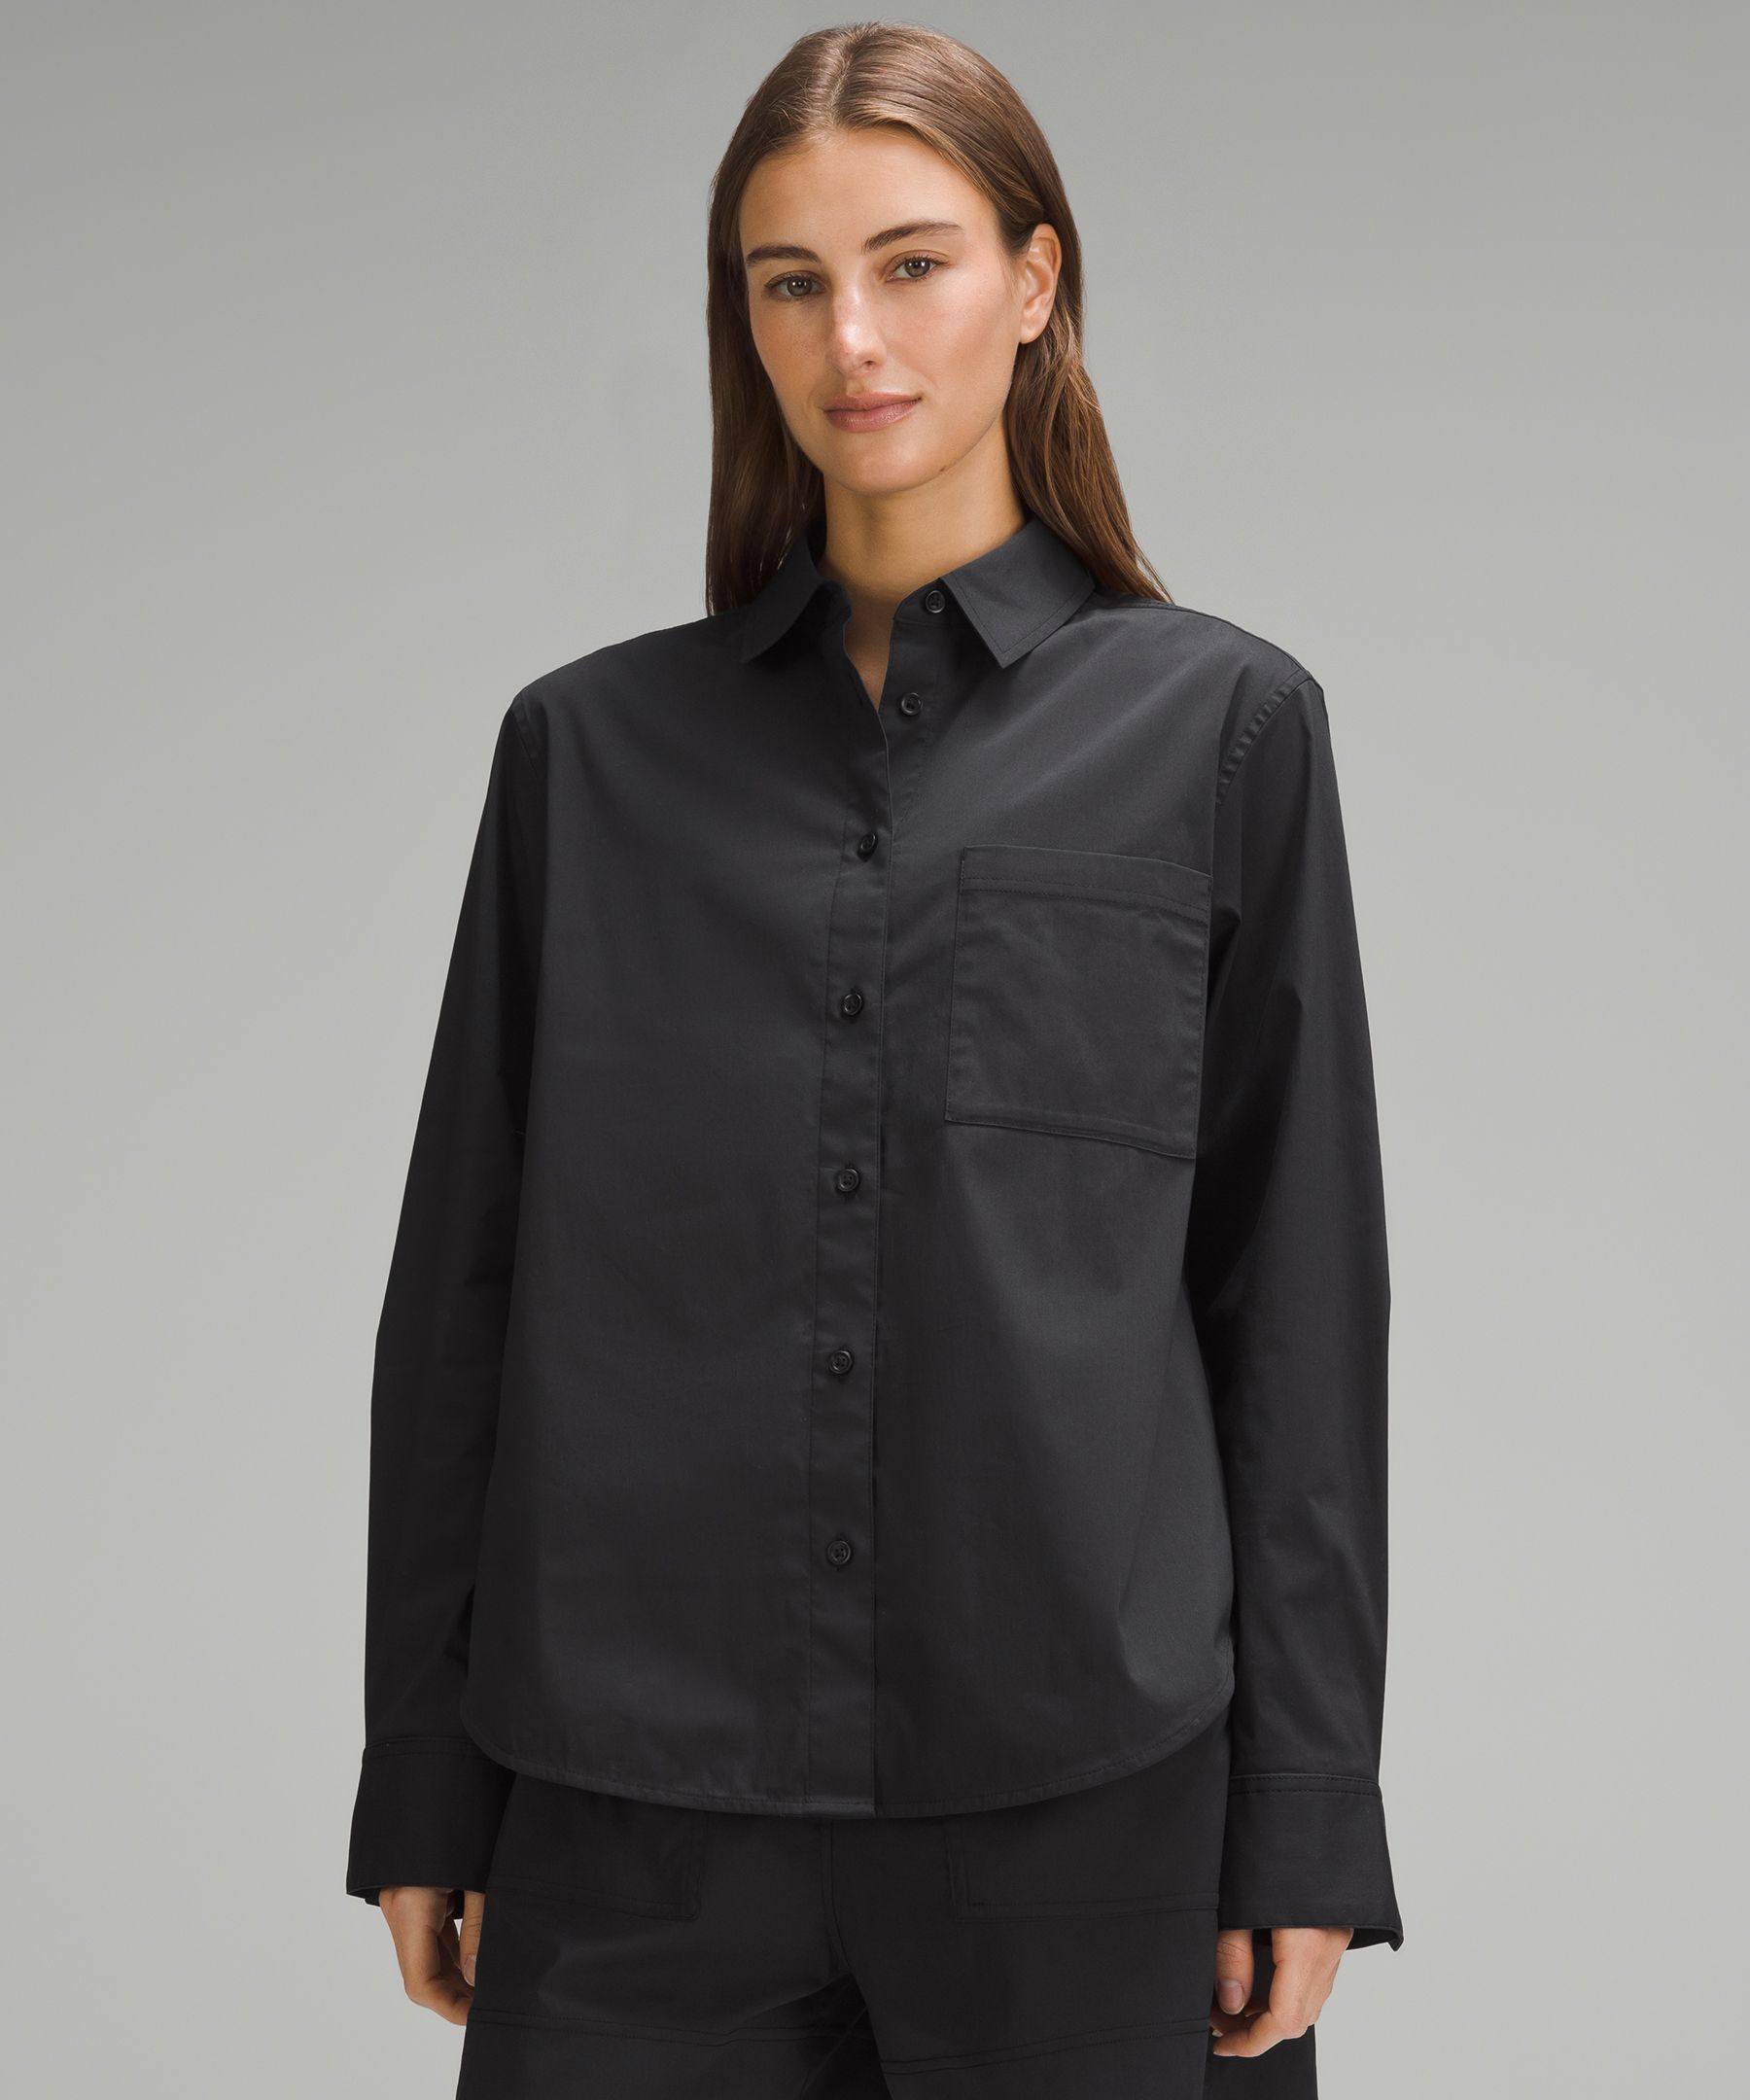 lululemon athletica Pleated Button Down Shirts for Women